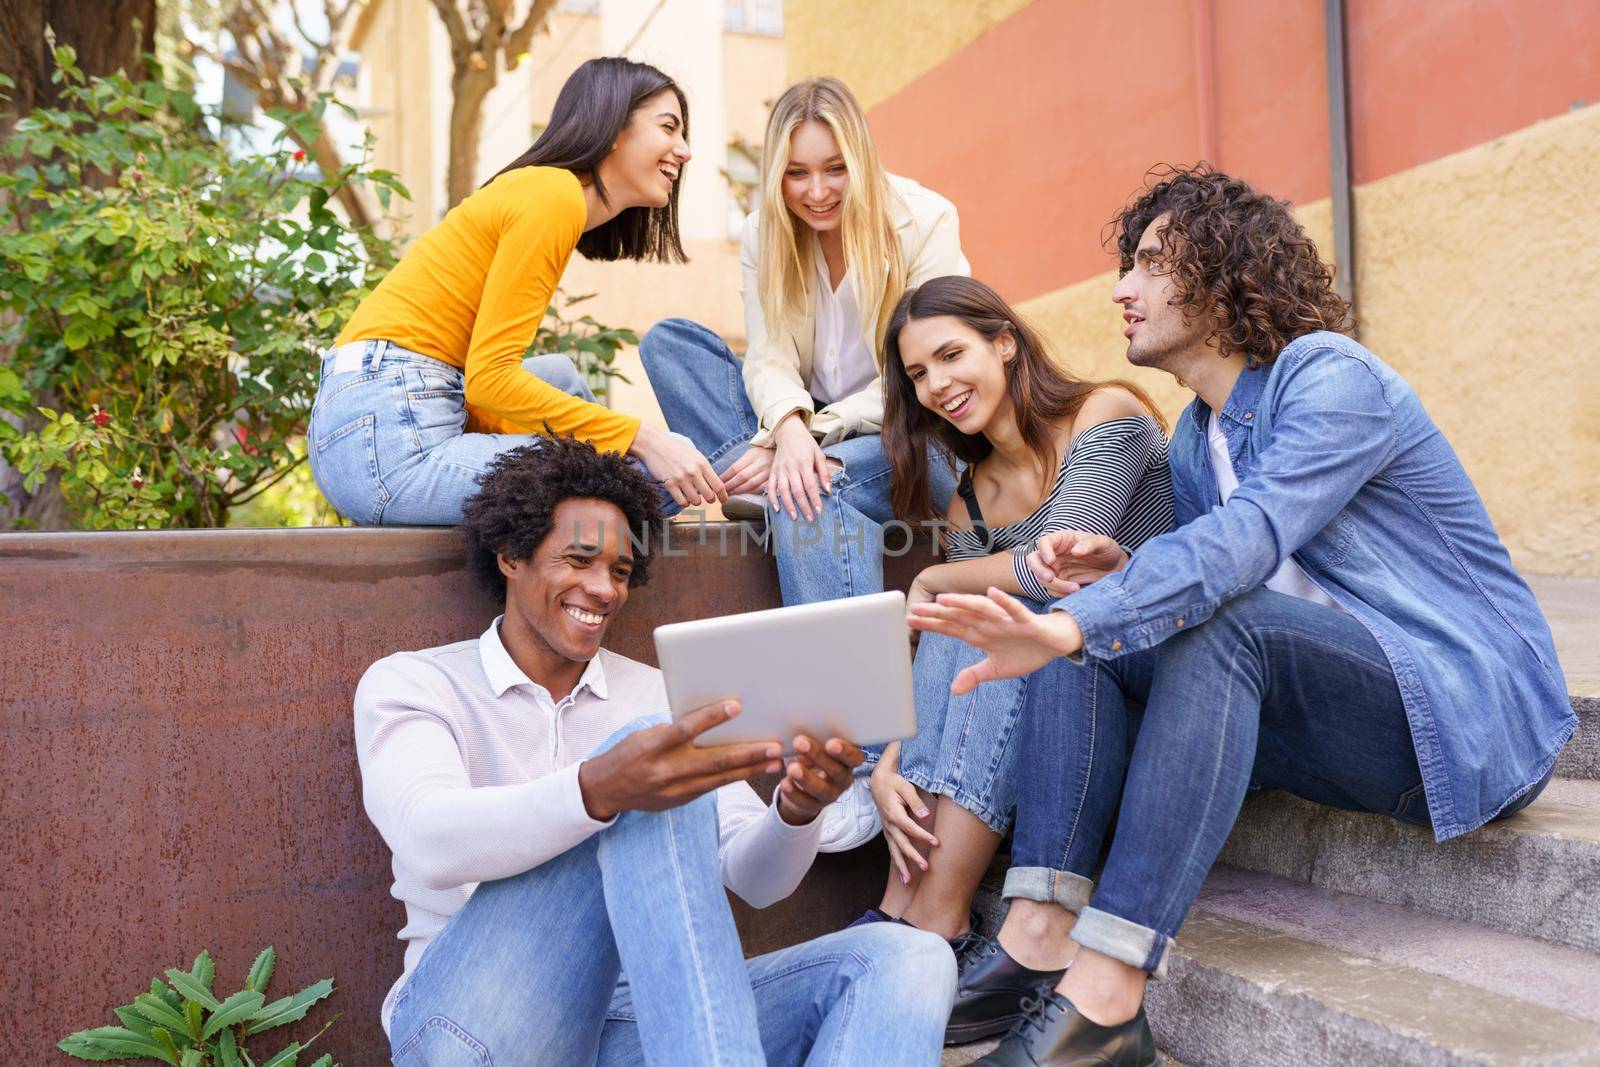 Multi-ethnic group of young people looking at a digital tablet outdoors in urban background. Group of men and woman sitting together on steps.